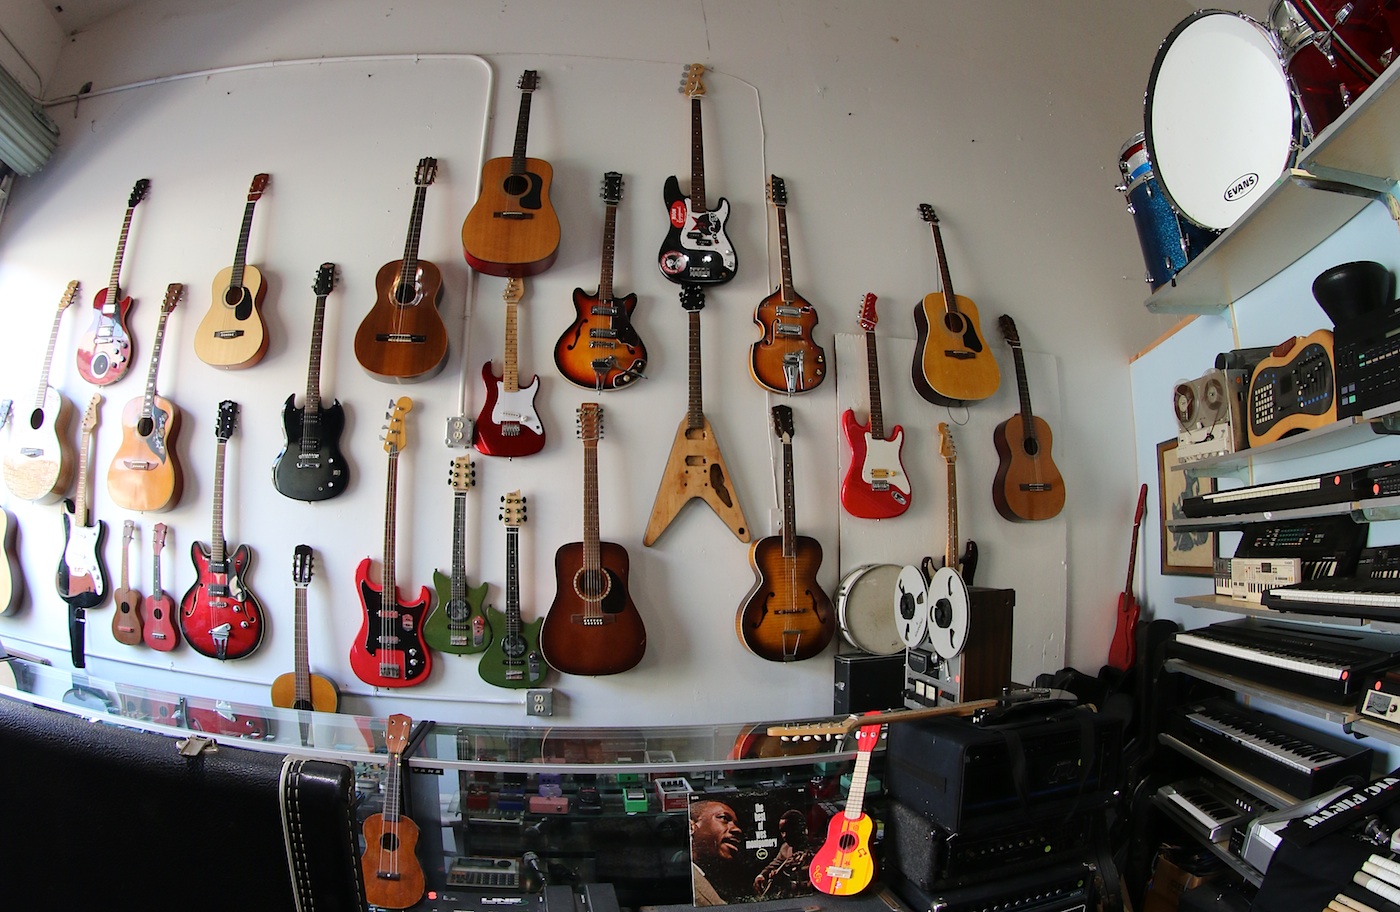 Door 4 Music is saling vintage and used music instruments, guitars, bass, drums, speakers, amplifier, microphones.... New music shop in Santa Barbara! Google street view trusted made by 805 Productions Santa Barbara.